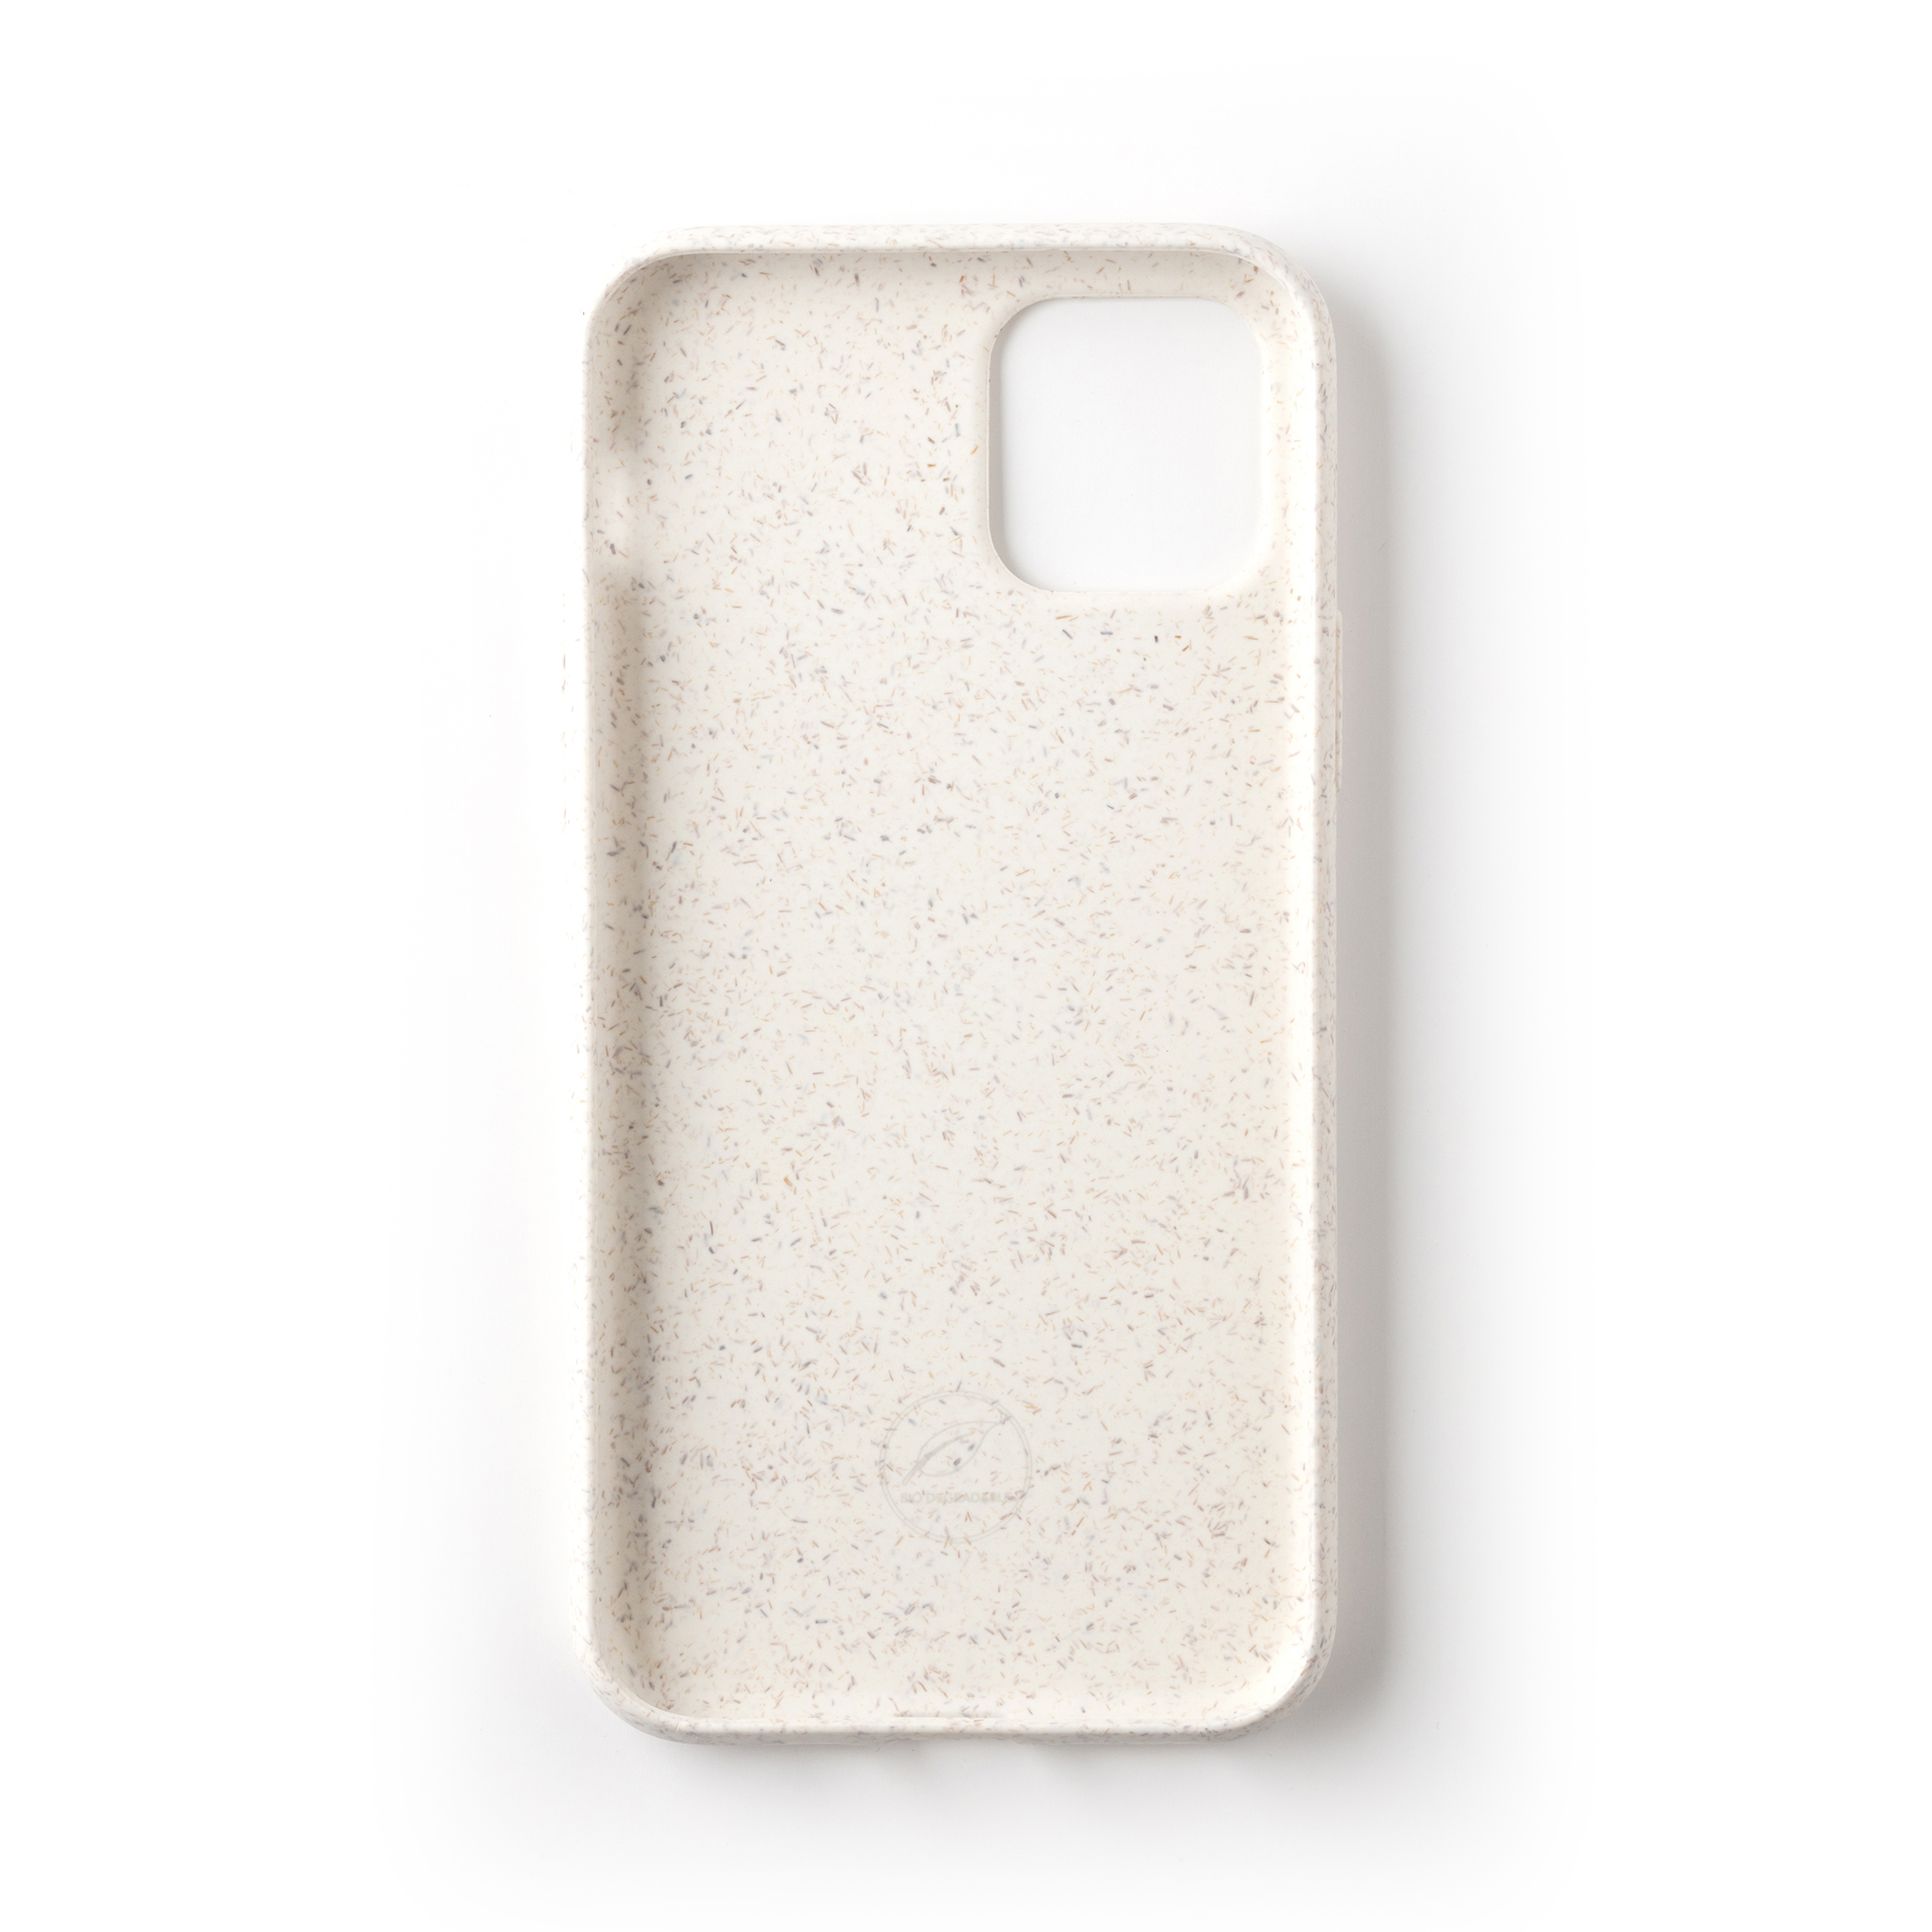 FASHION iPhone Backcover, ECO PRO, 11 WILMA BY RIP11, Apple, white